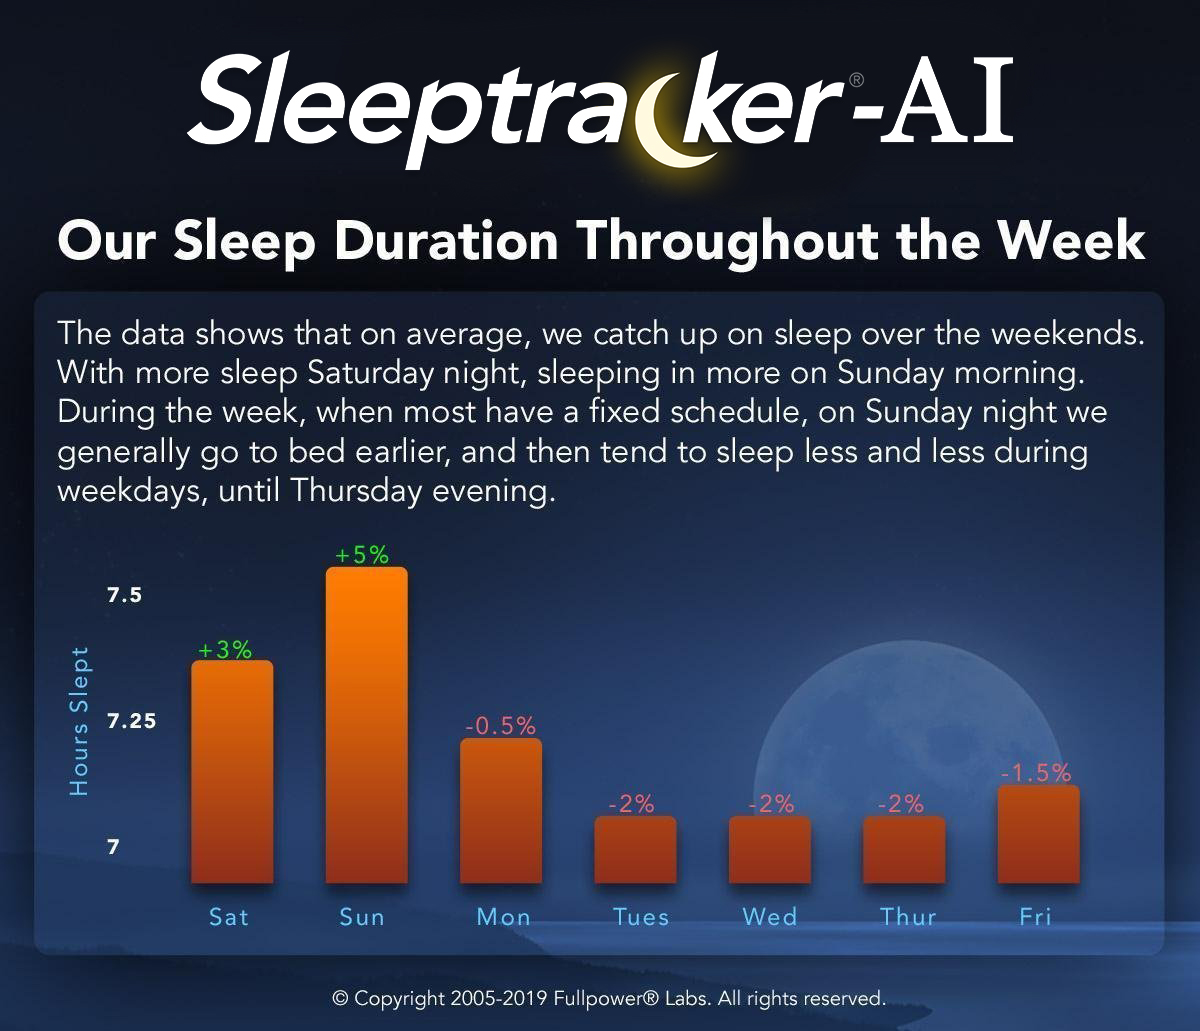 Our Sleep Durations Throughout the Week